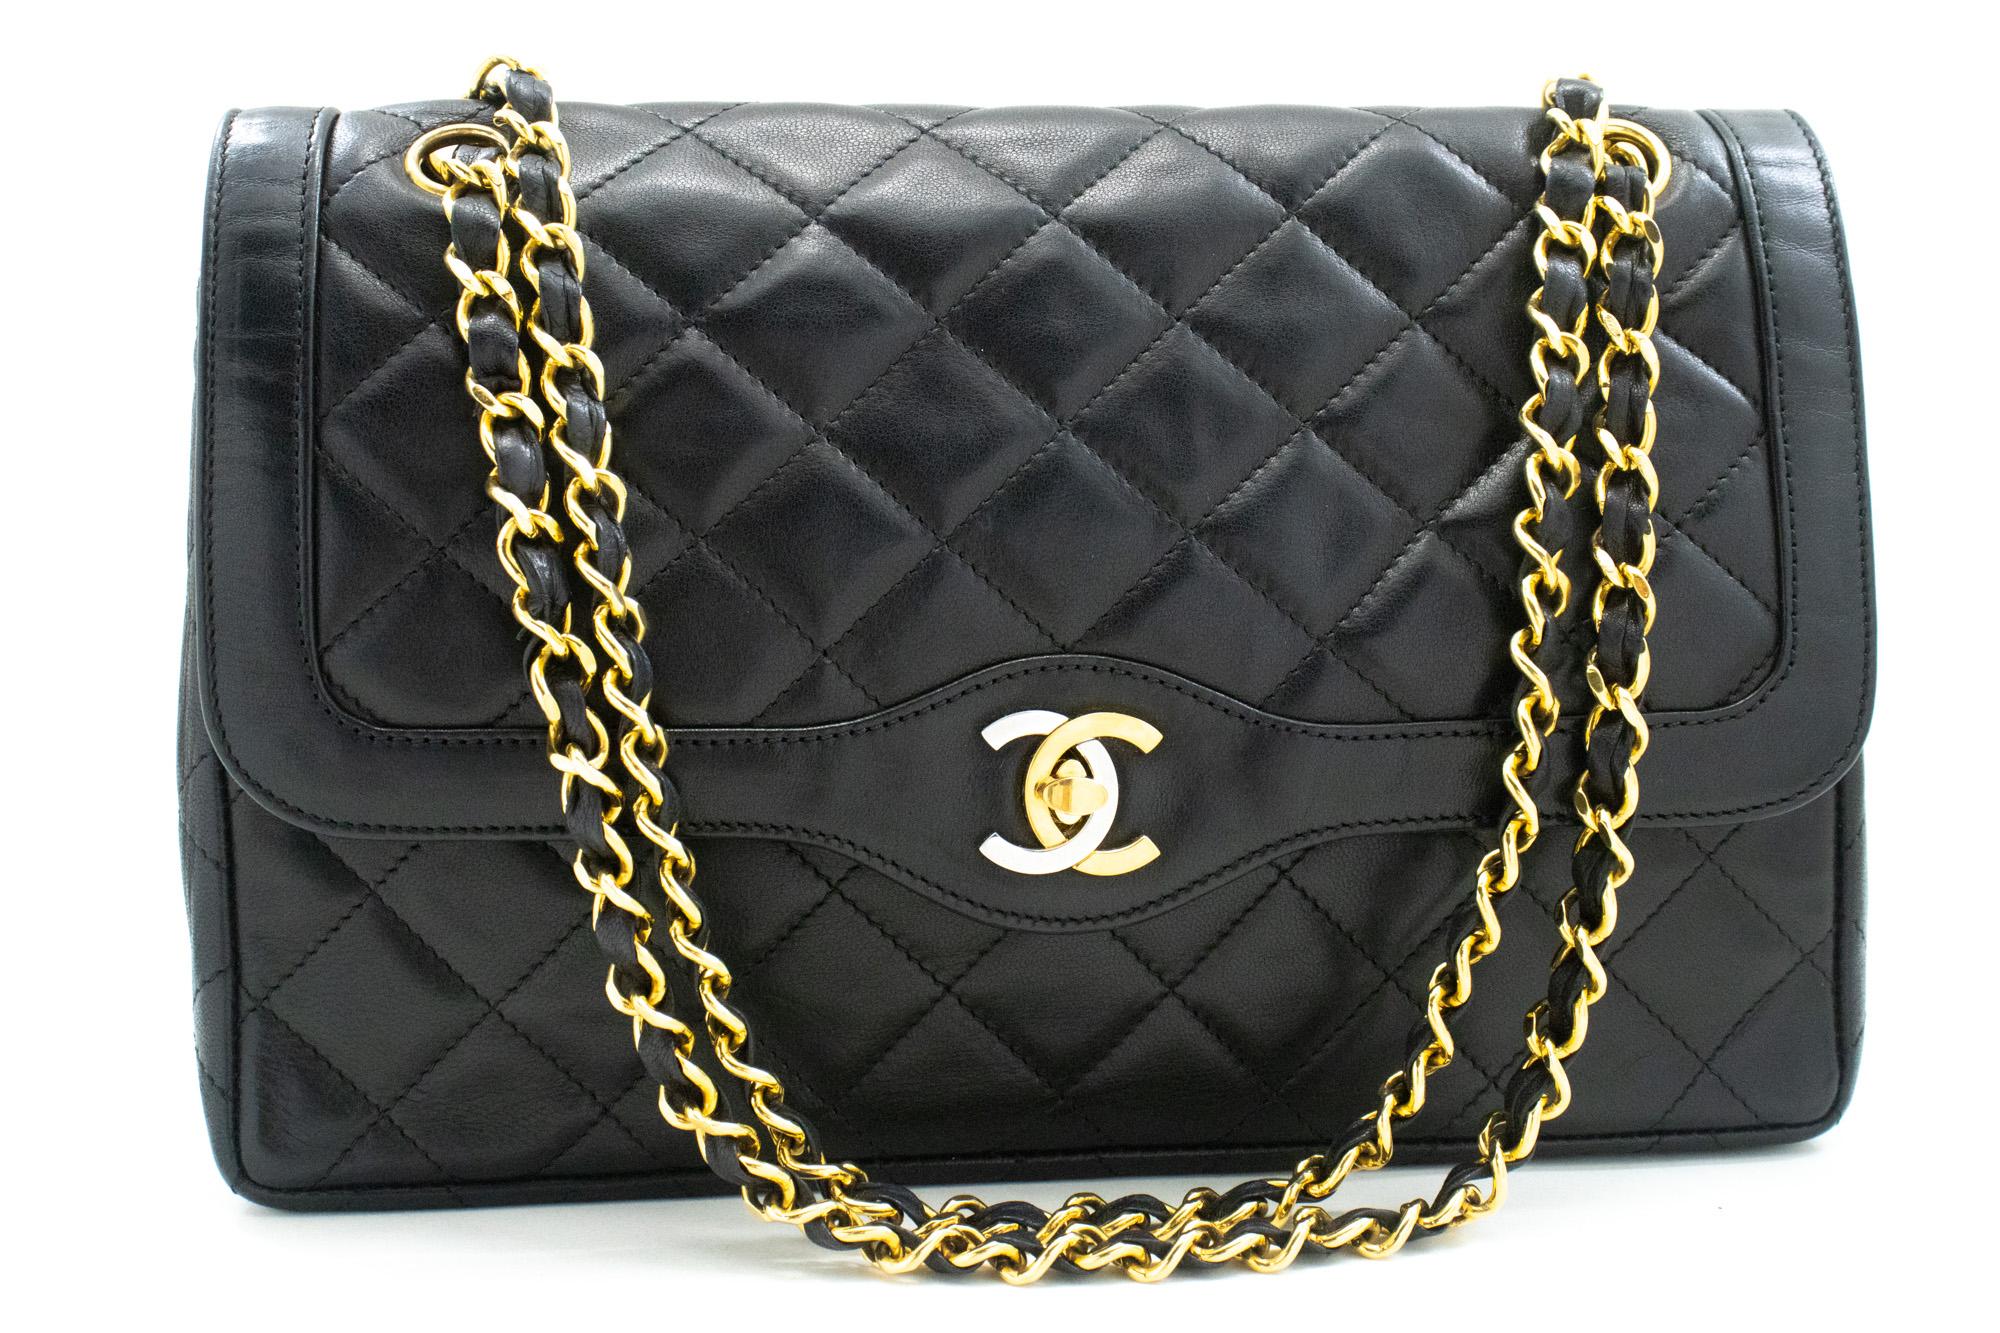 An authentic CHANEL Paris Limited Chain Shoulder Bag Black Quilted Double Flap. The color is Black. The outside material is Leather. The pattern is Solid. This item is Vintage / Classic. The year of manufacture would be 1986-1988.
Conditions &